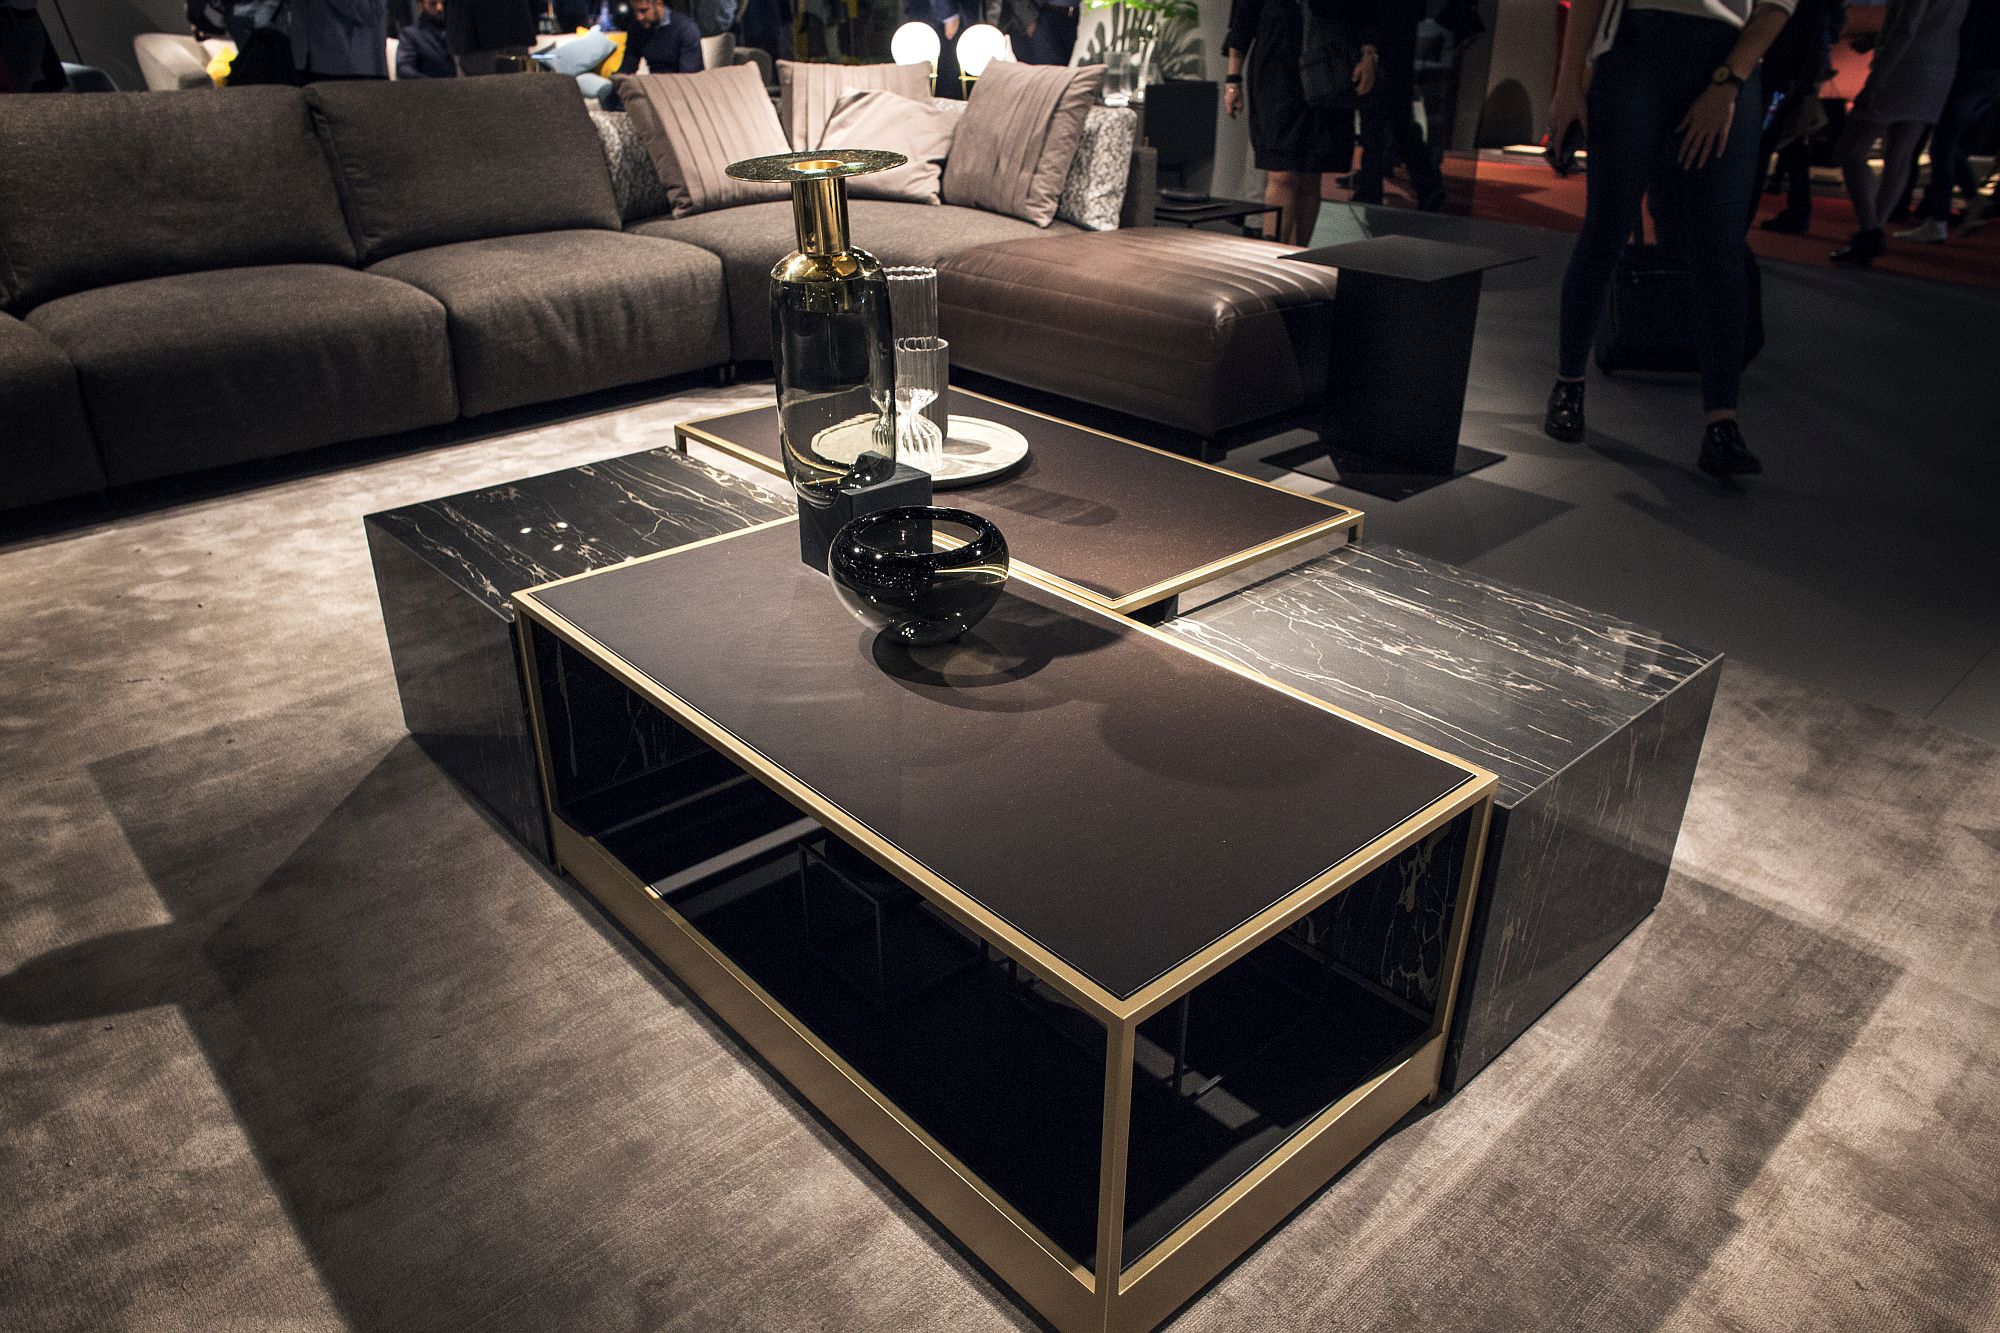 Create your won custom coffee table with storage by using modular pieces